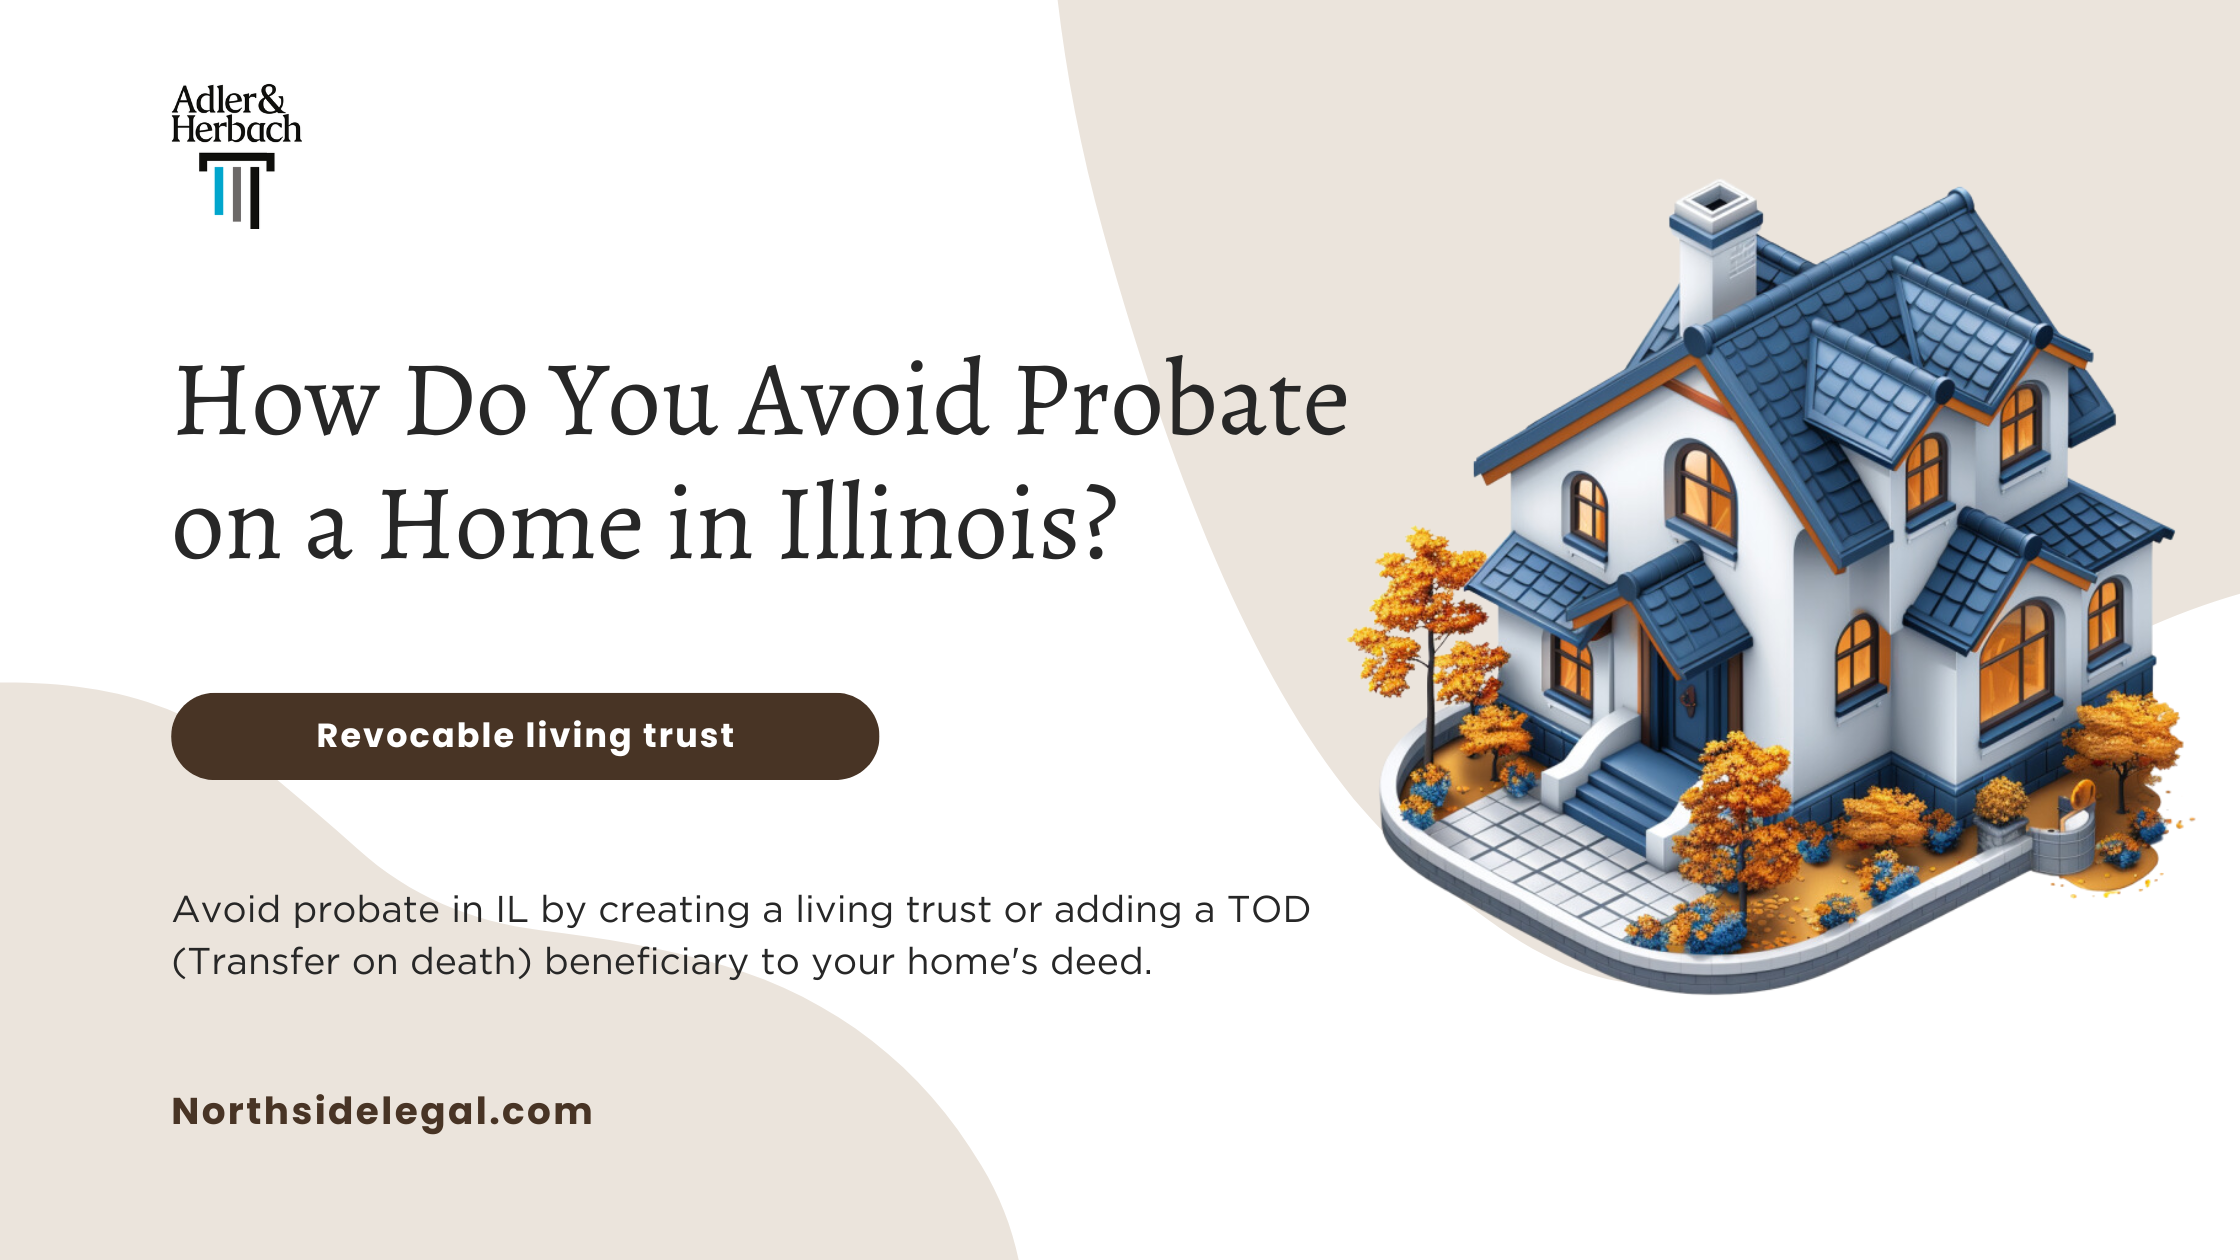 How Do You Avoid Probate on a Home in Illinois? Avoid probate in IL by creating a living trust or adding a TOD (Transfer on death) beneficiary to your home's deed.